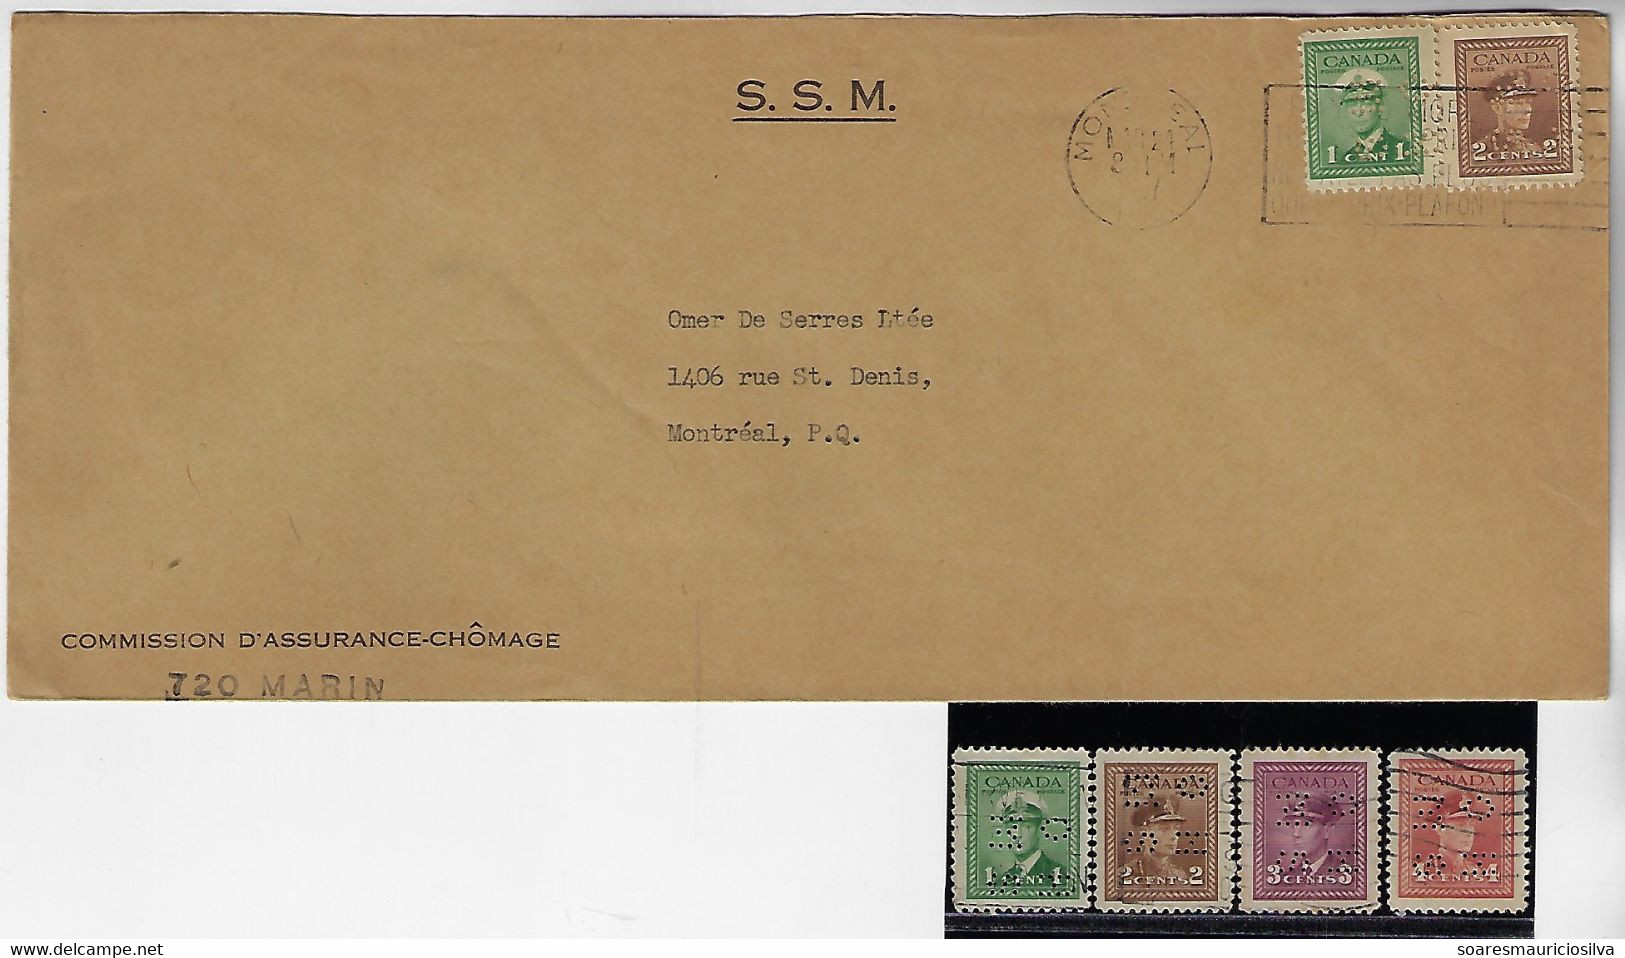 Canada 1947 Cover S.S.M. Unemployment Insurance Commission Perfin OH/MS On Her/His Majesty 's Service + 4 Stamp - Perfin